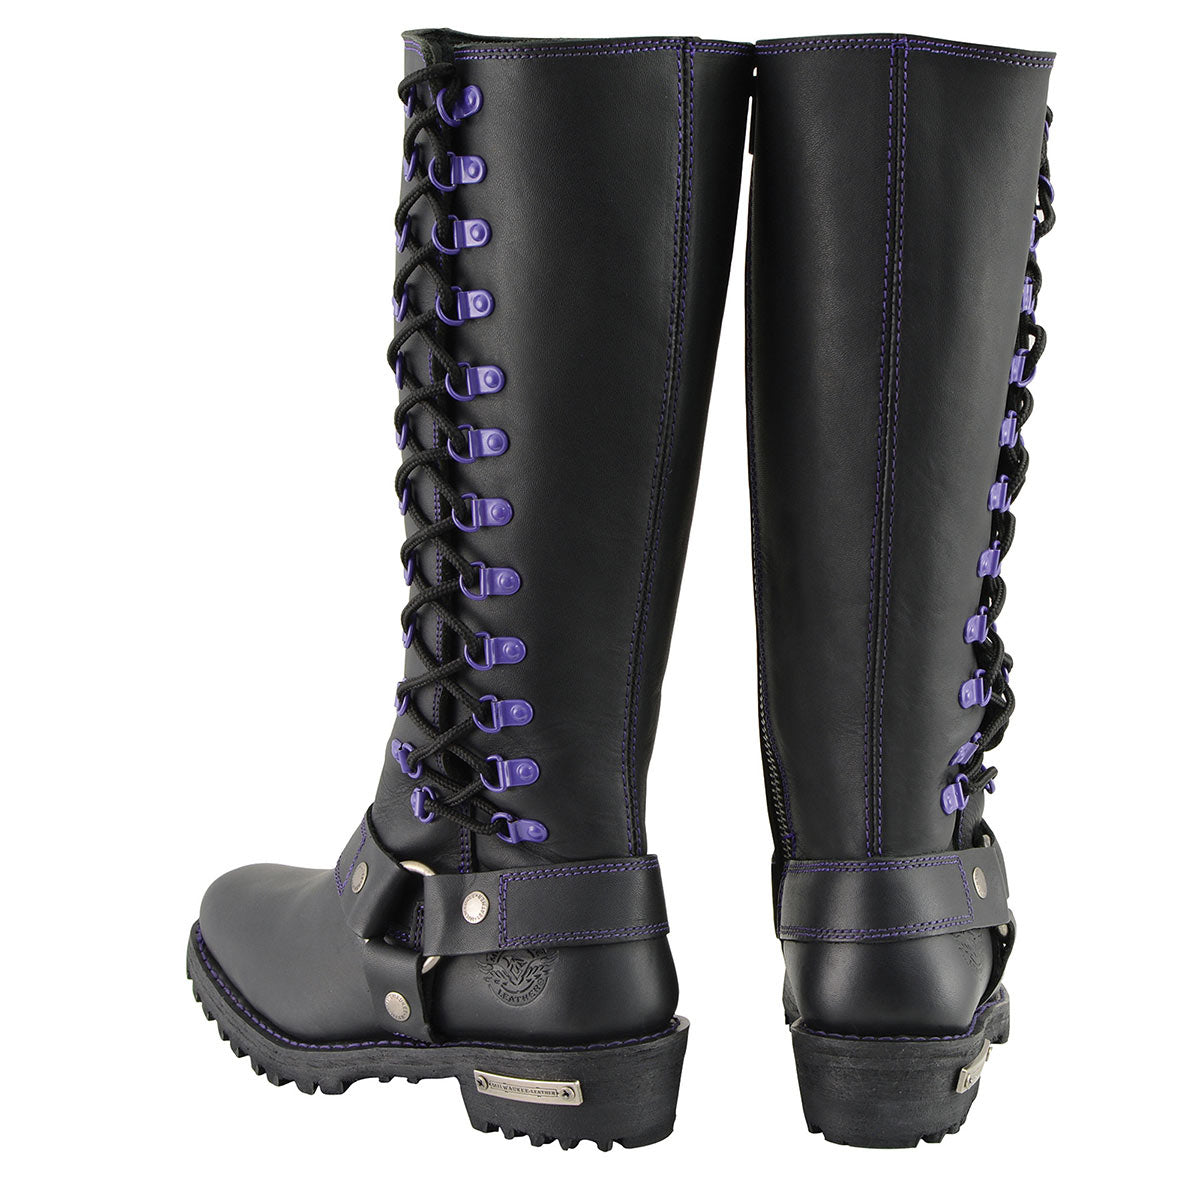 Milwaukee Leather MBL9366 Women's Black 14-inch Leather Harness Boots with Purple Accent Lacing